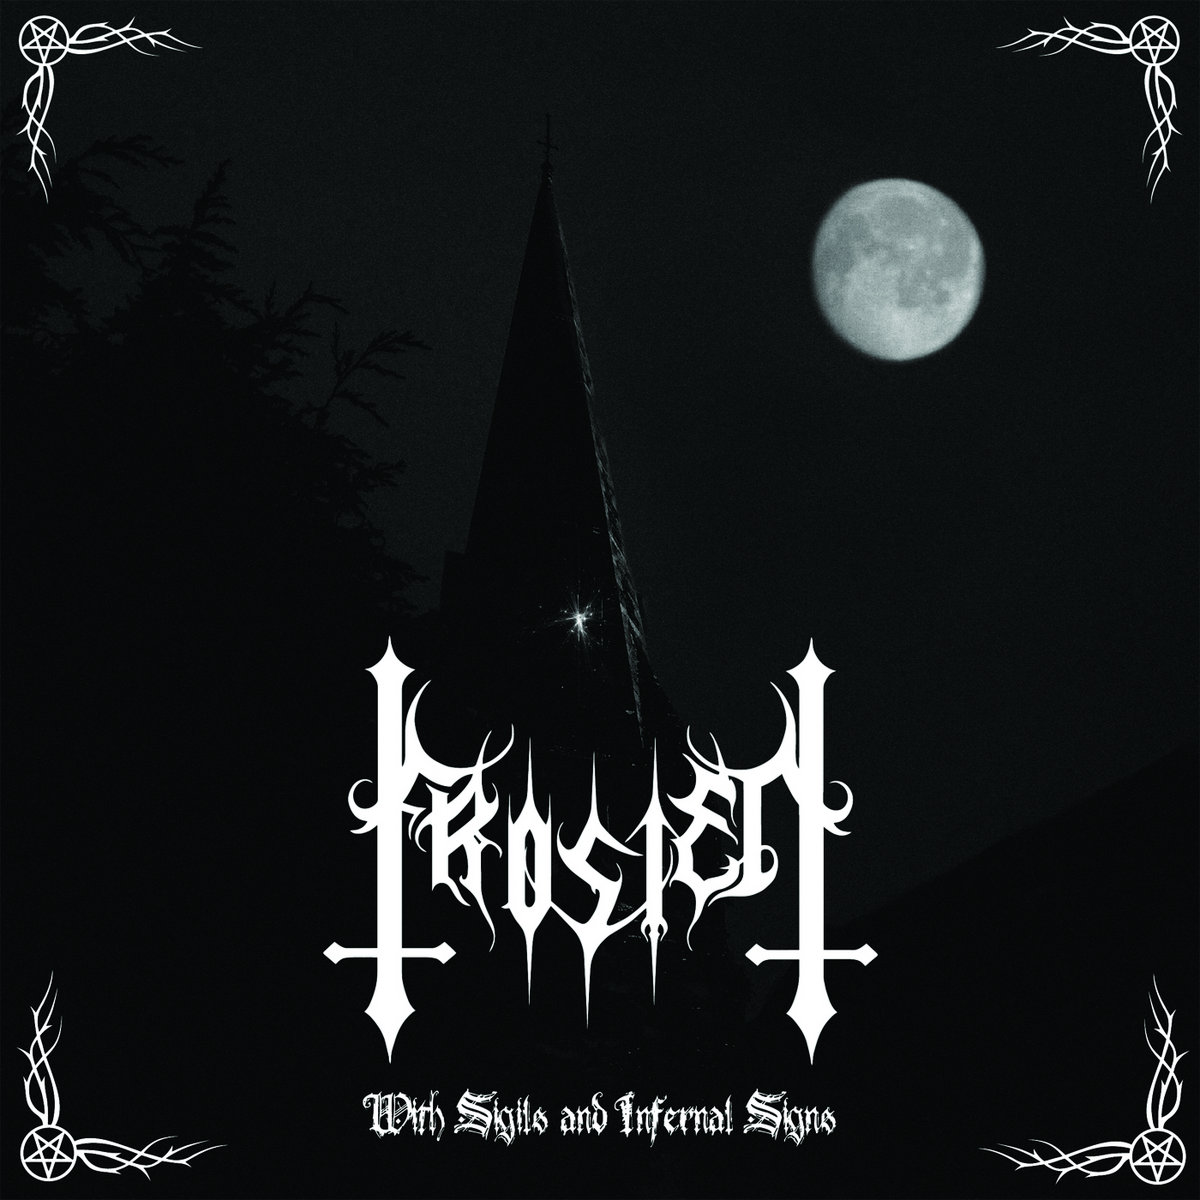 Frosten - With Sigils and Infernal Signs